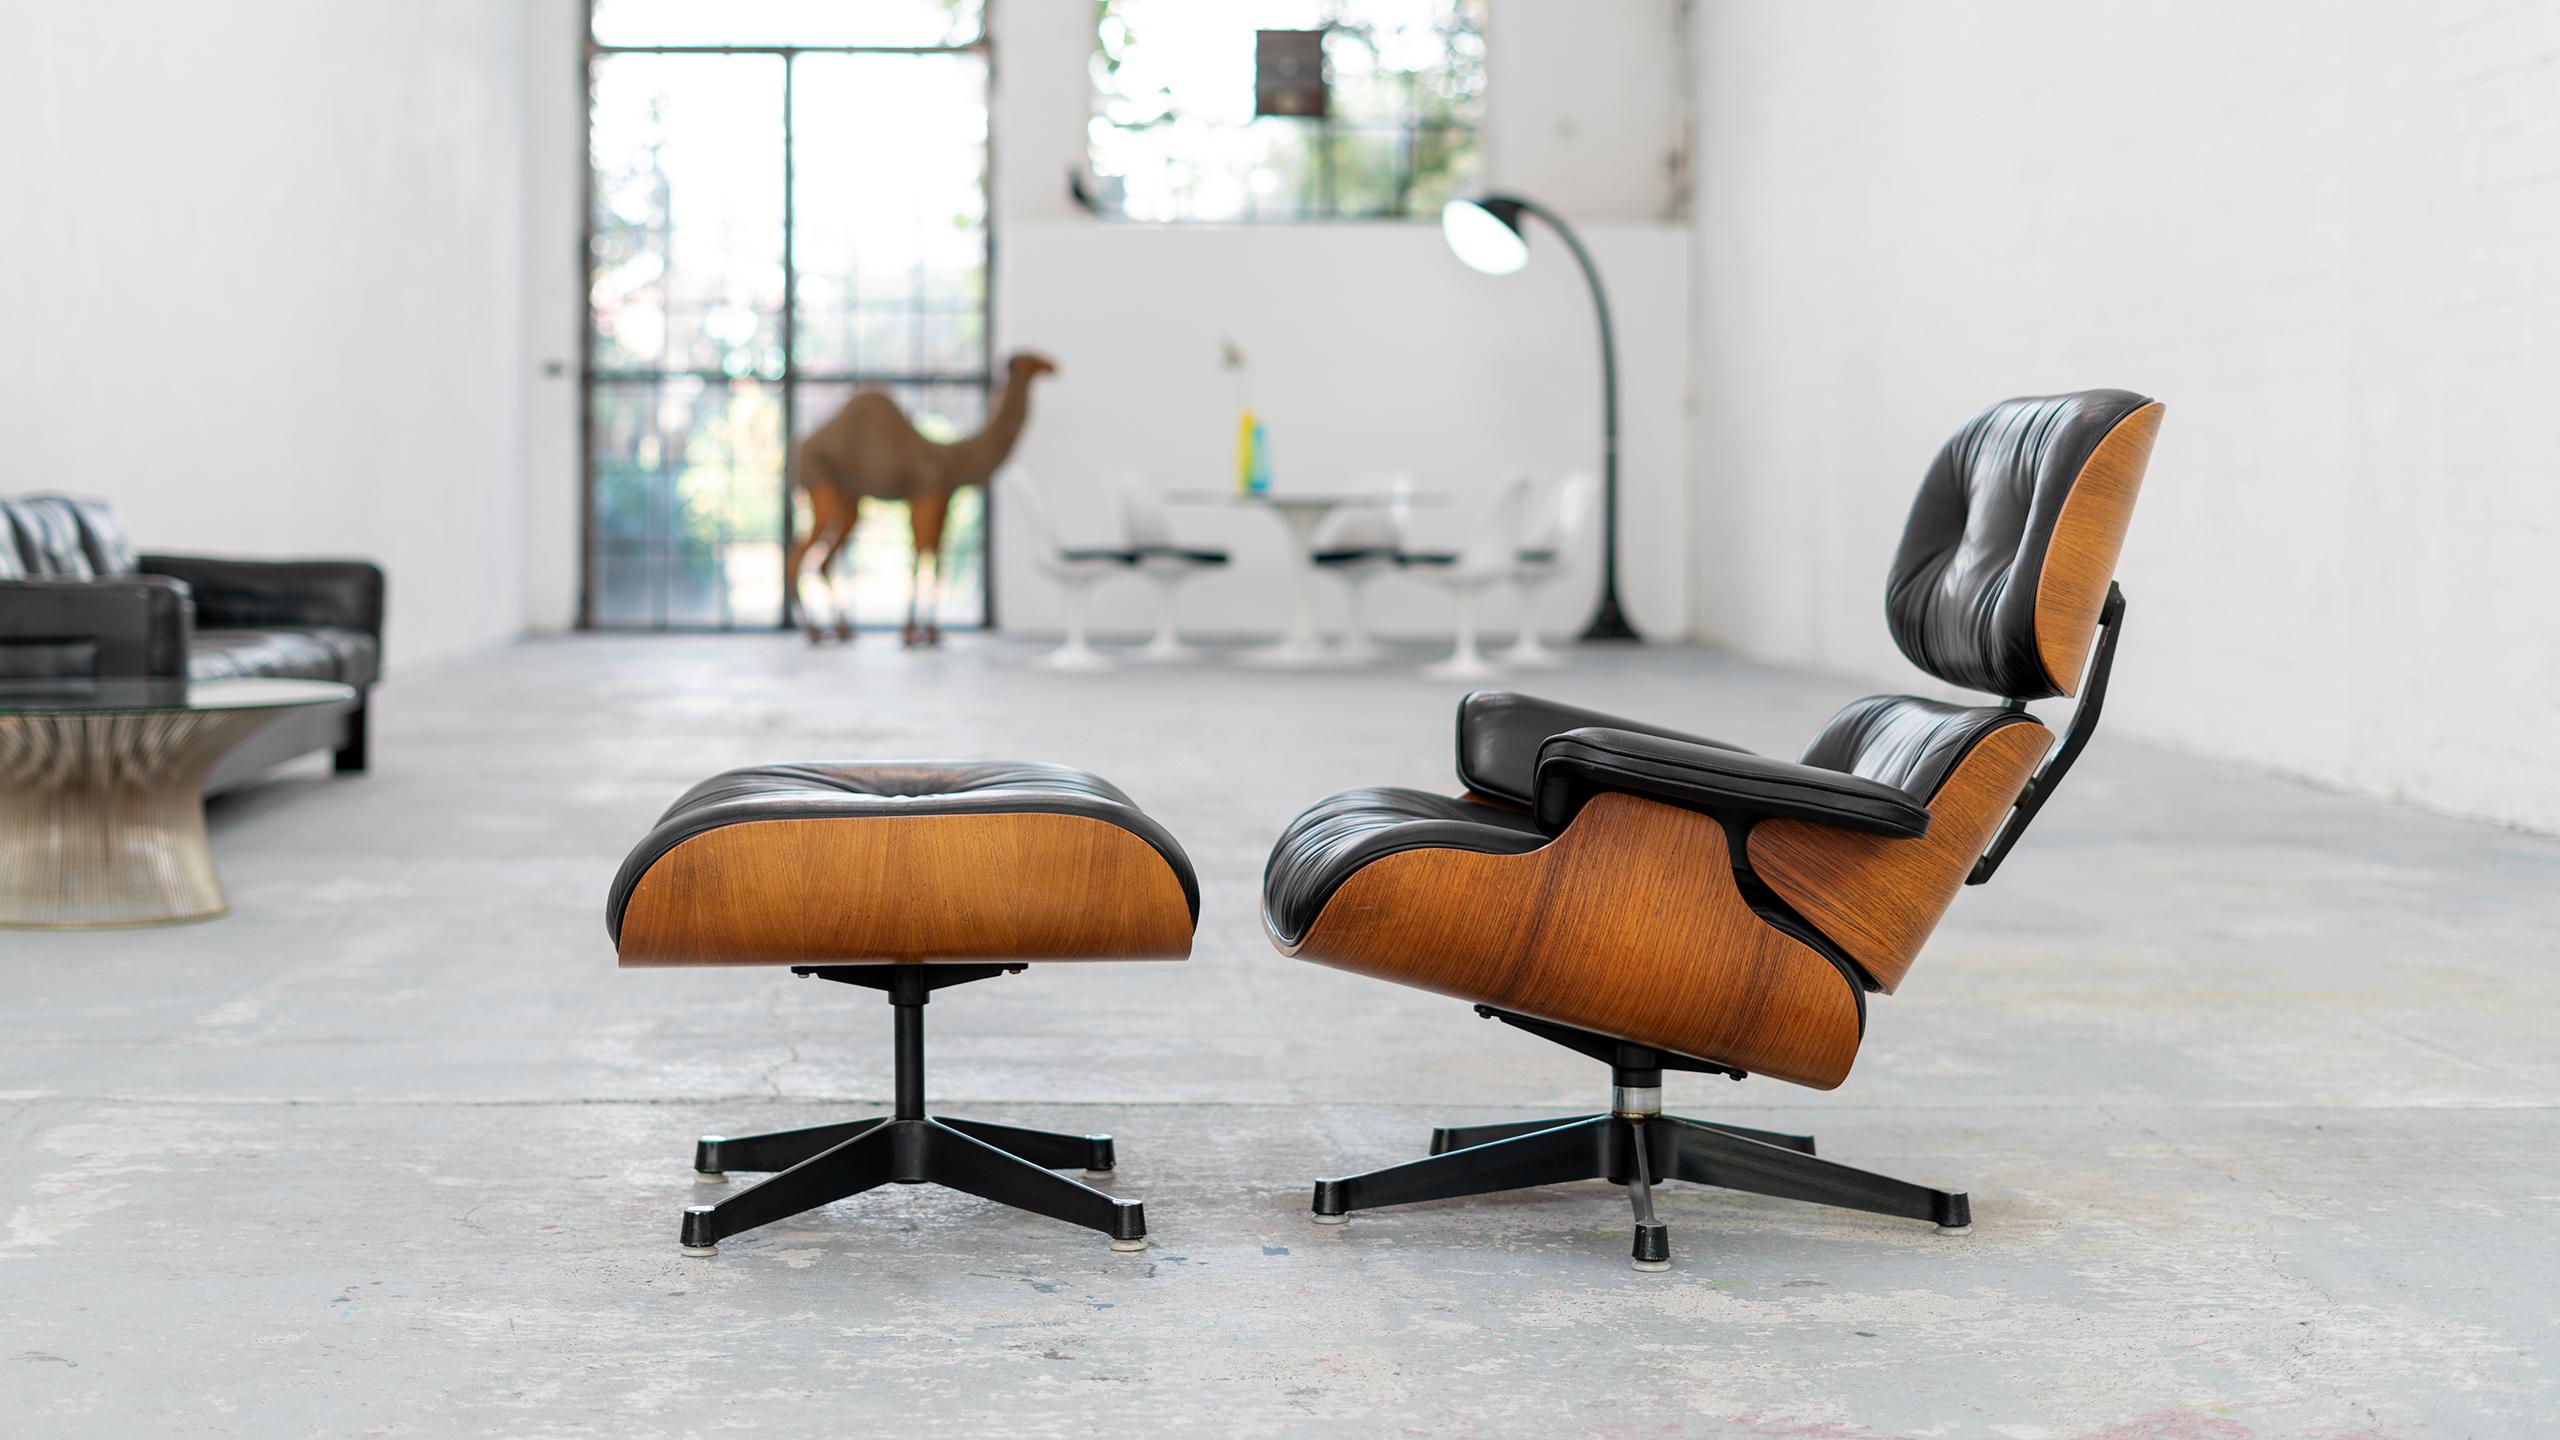 German Charles & Ray Eames - Lounge Chair, 1957 by Fehlbaum & Contura - 1st Series